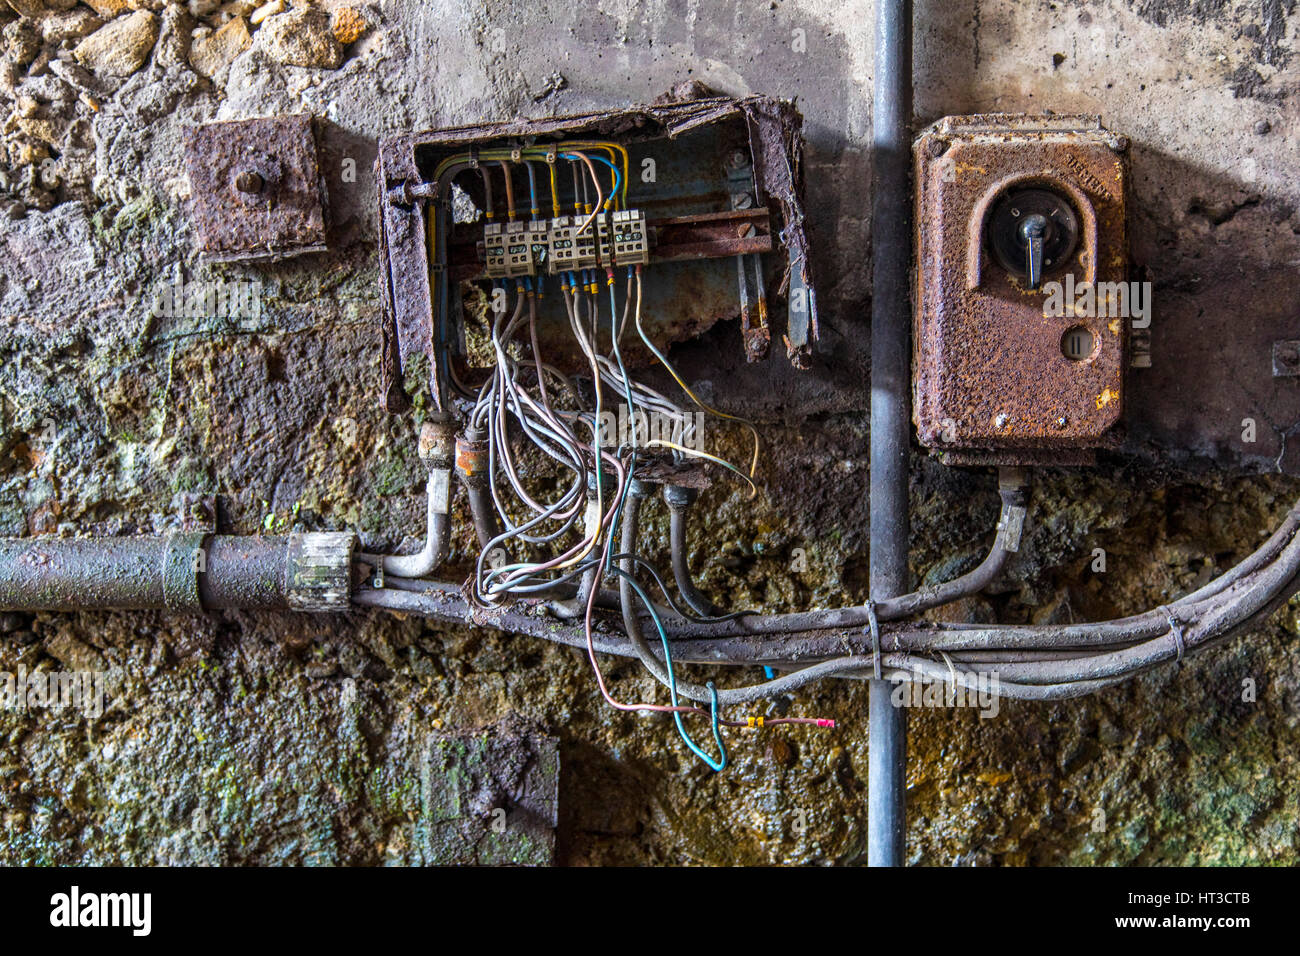 Electrical equipment, switch, destroyed, broken, Rusty metal surface, structures, Stock Photo